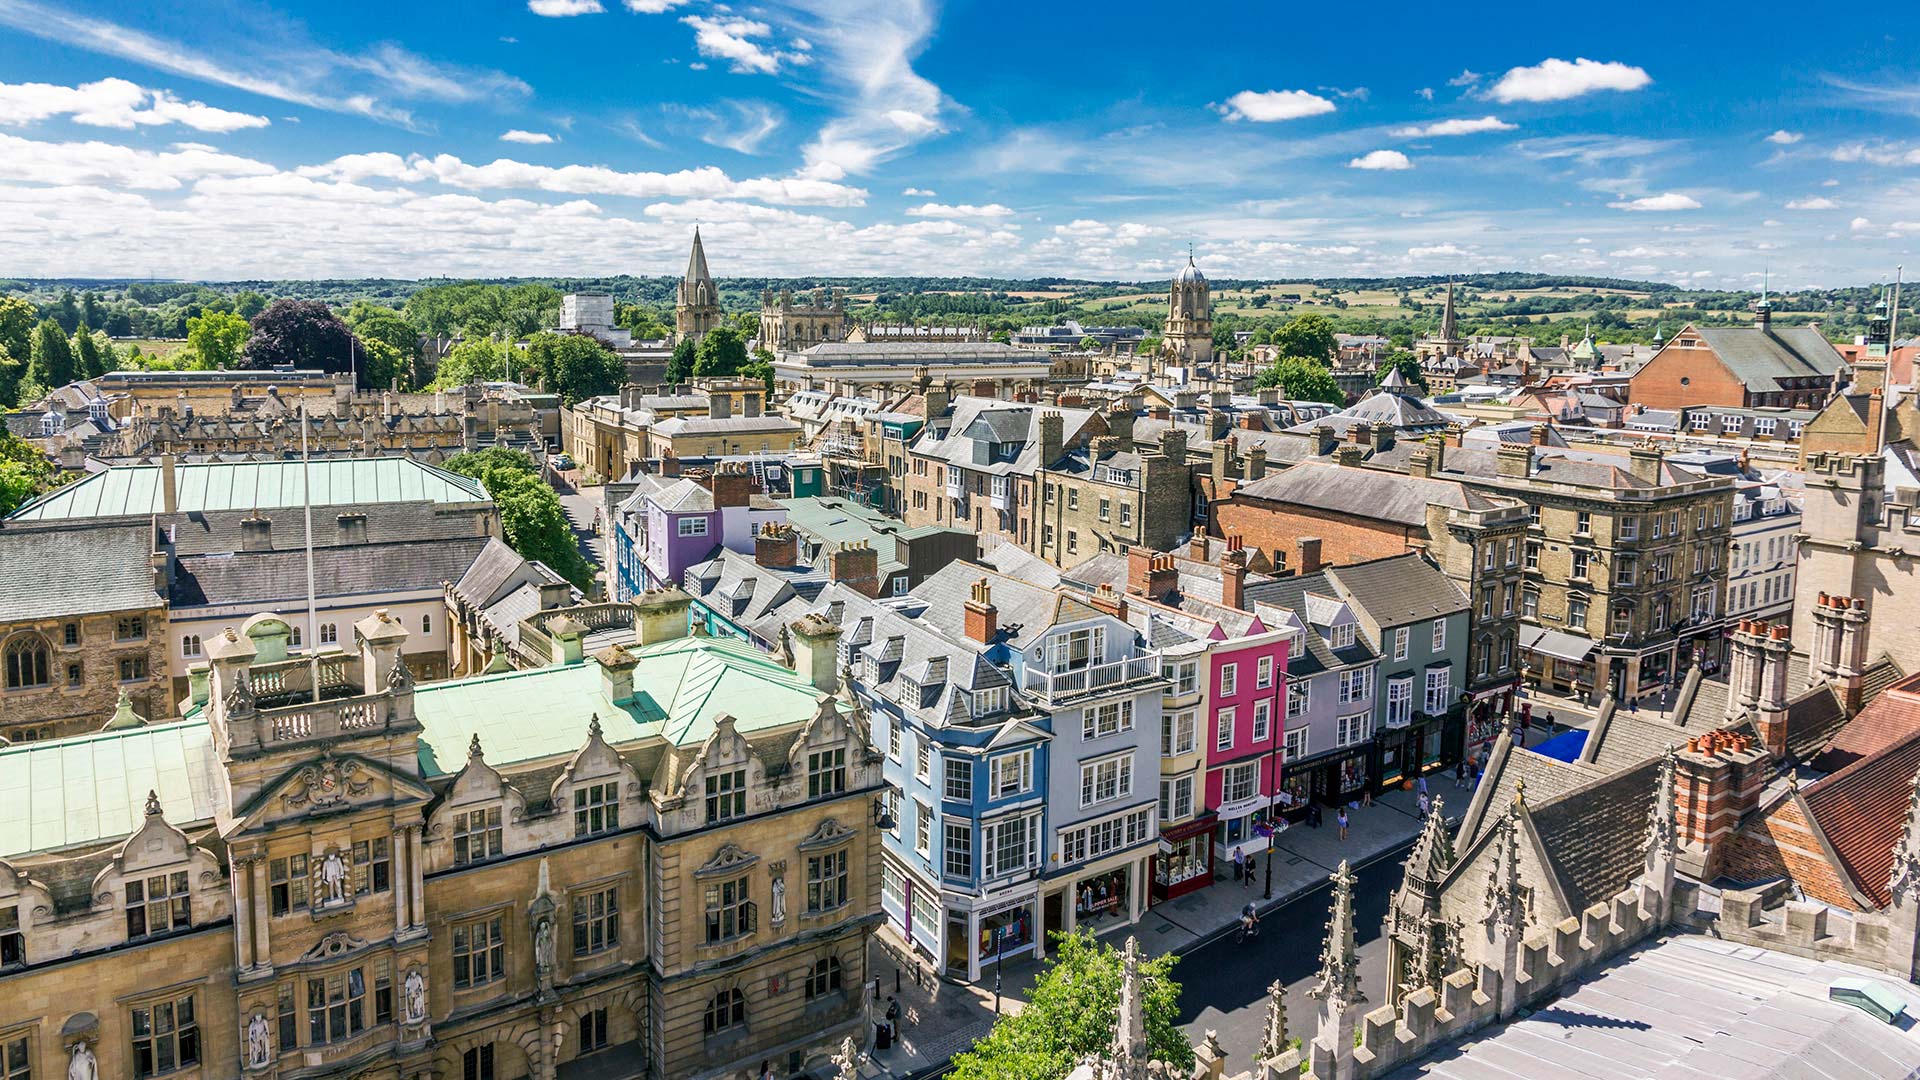 Panorama to illustrate dating in oxford